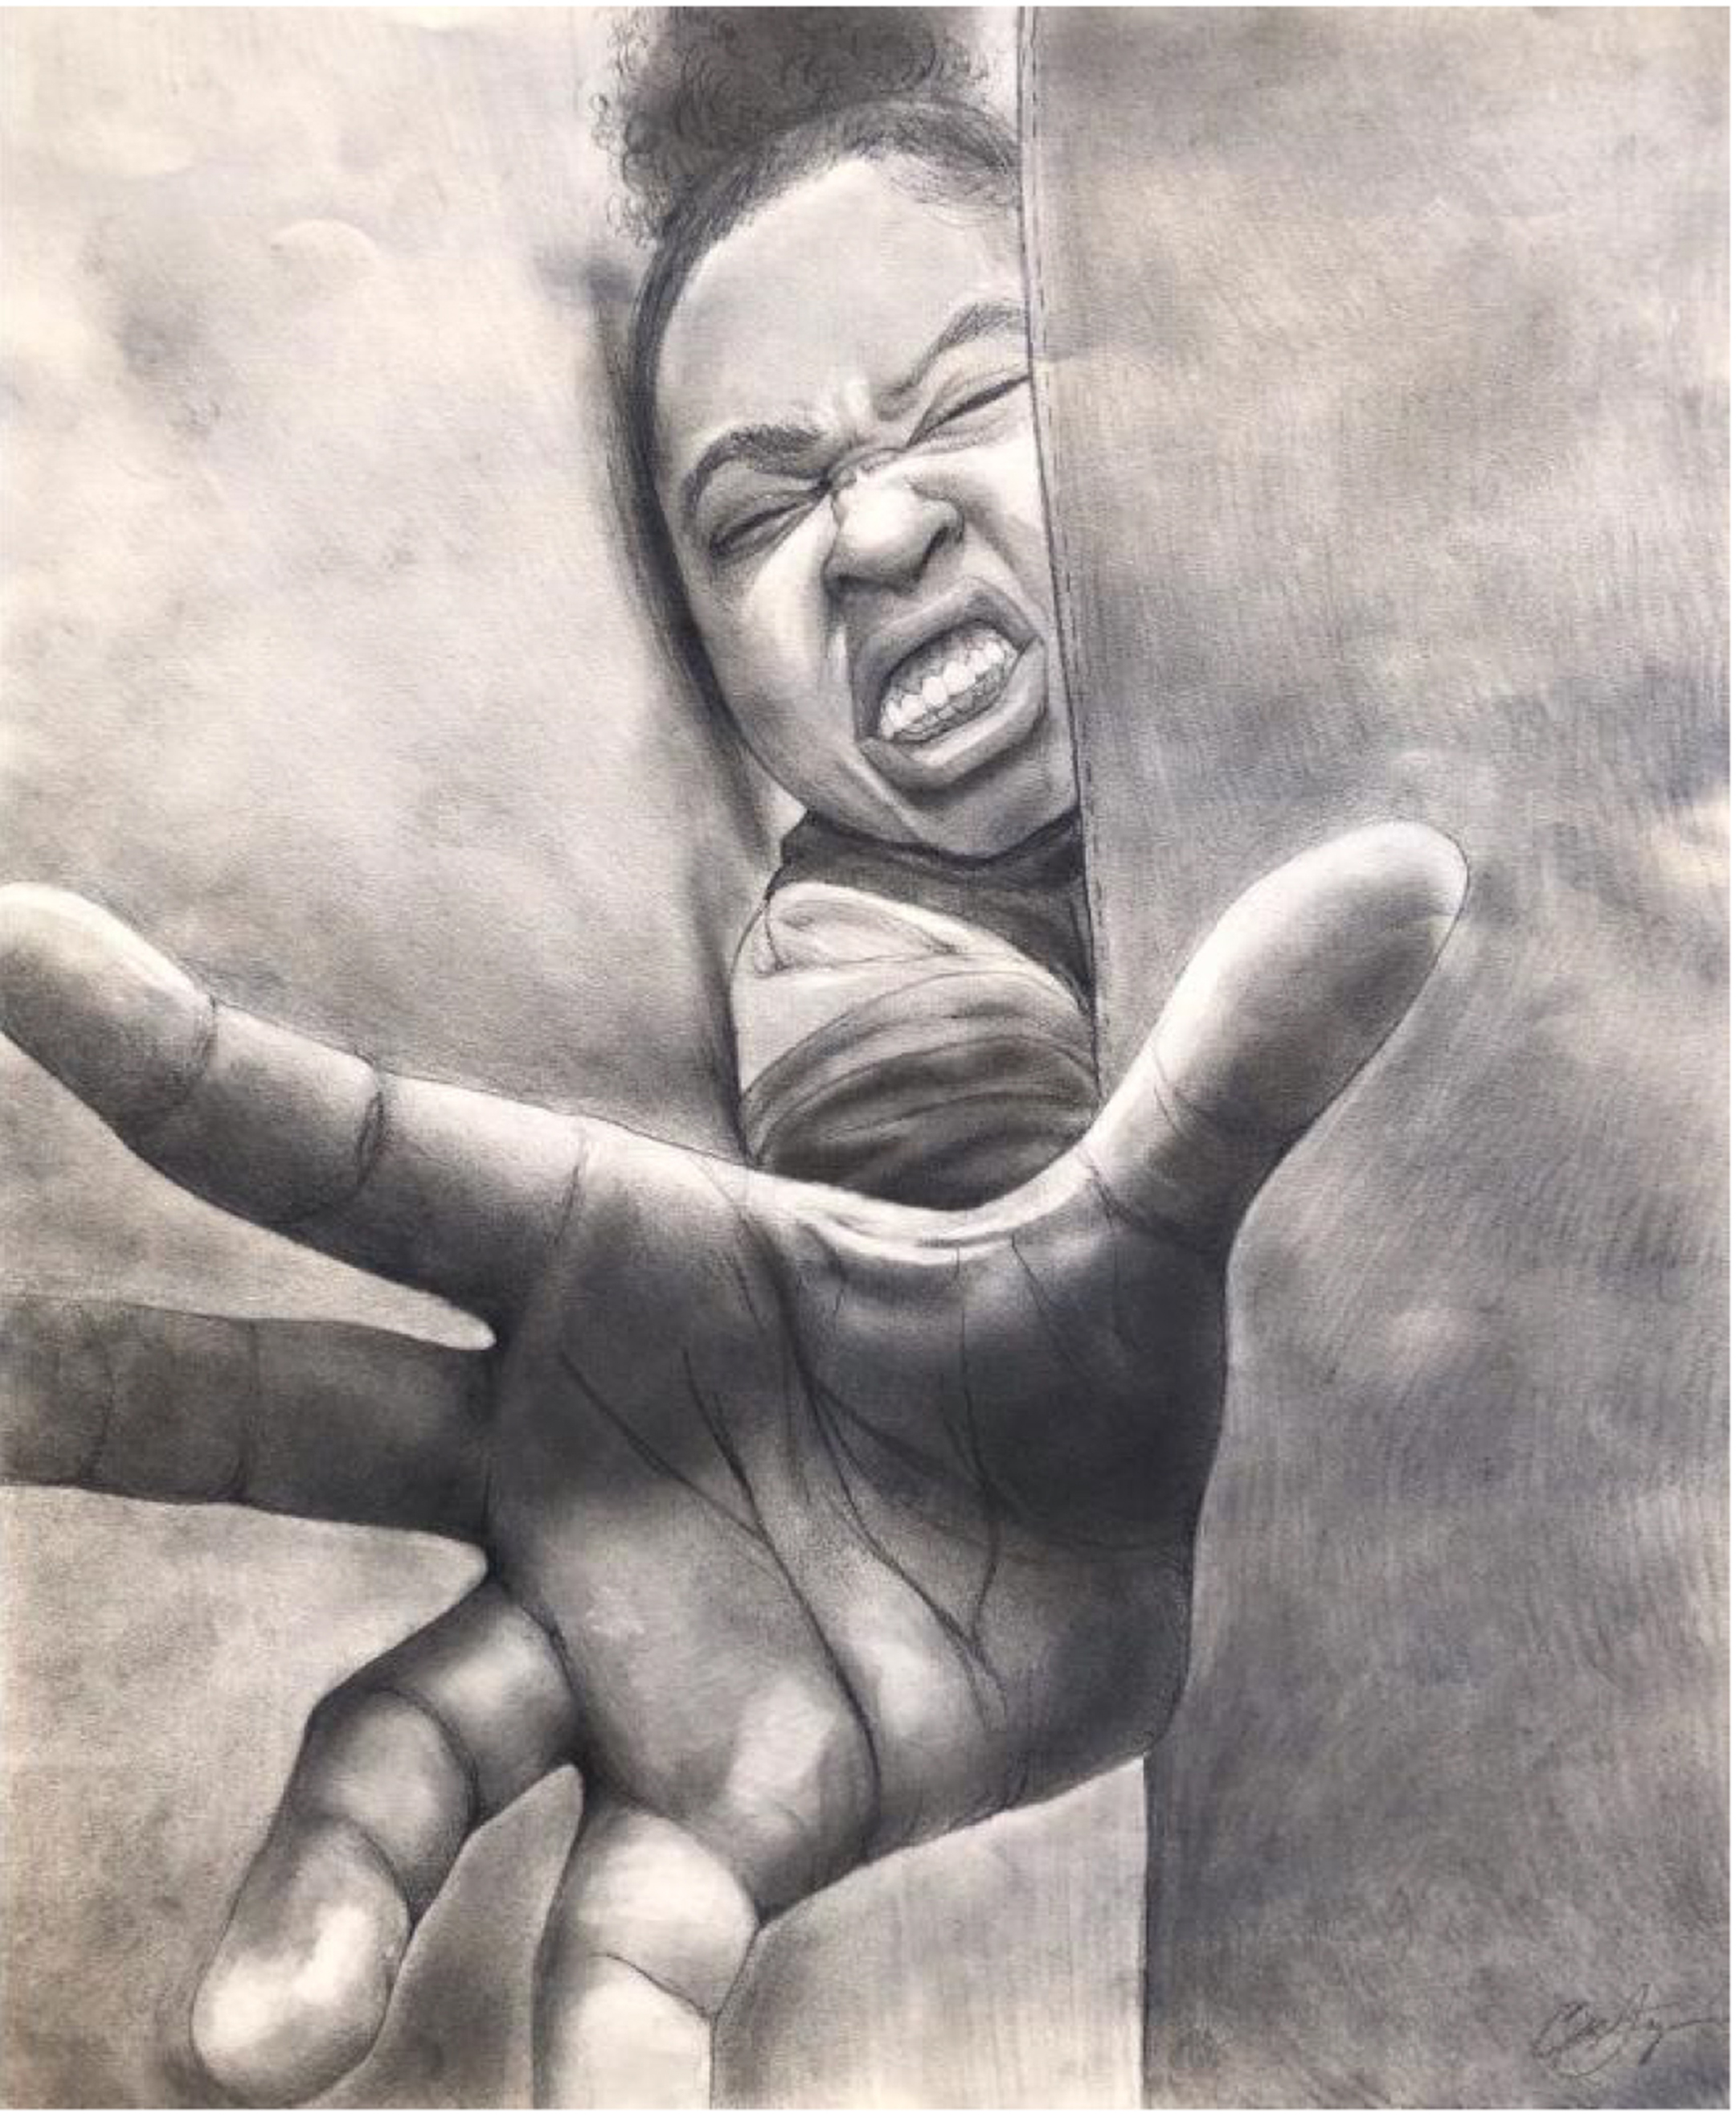 Illustration of a young black woman reaching out as she tries squeezing between two objects